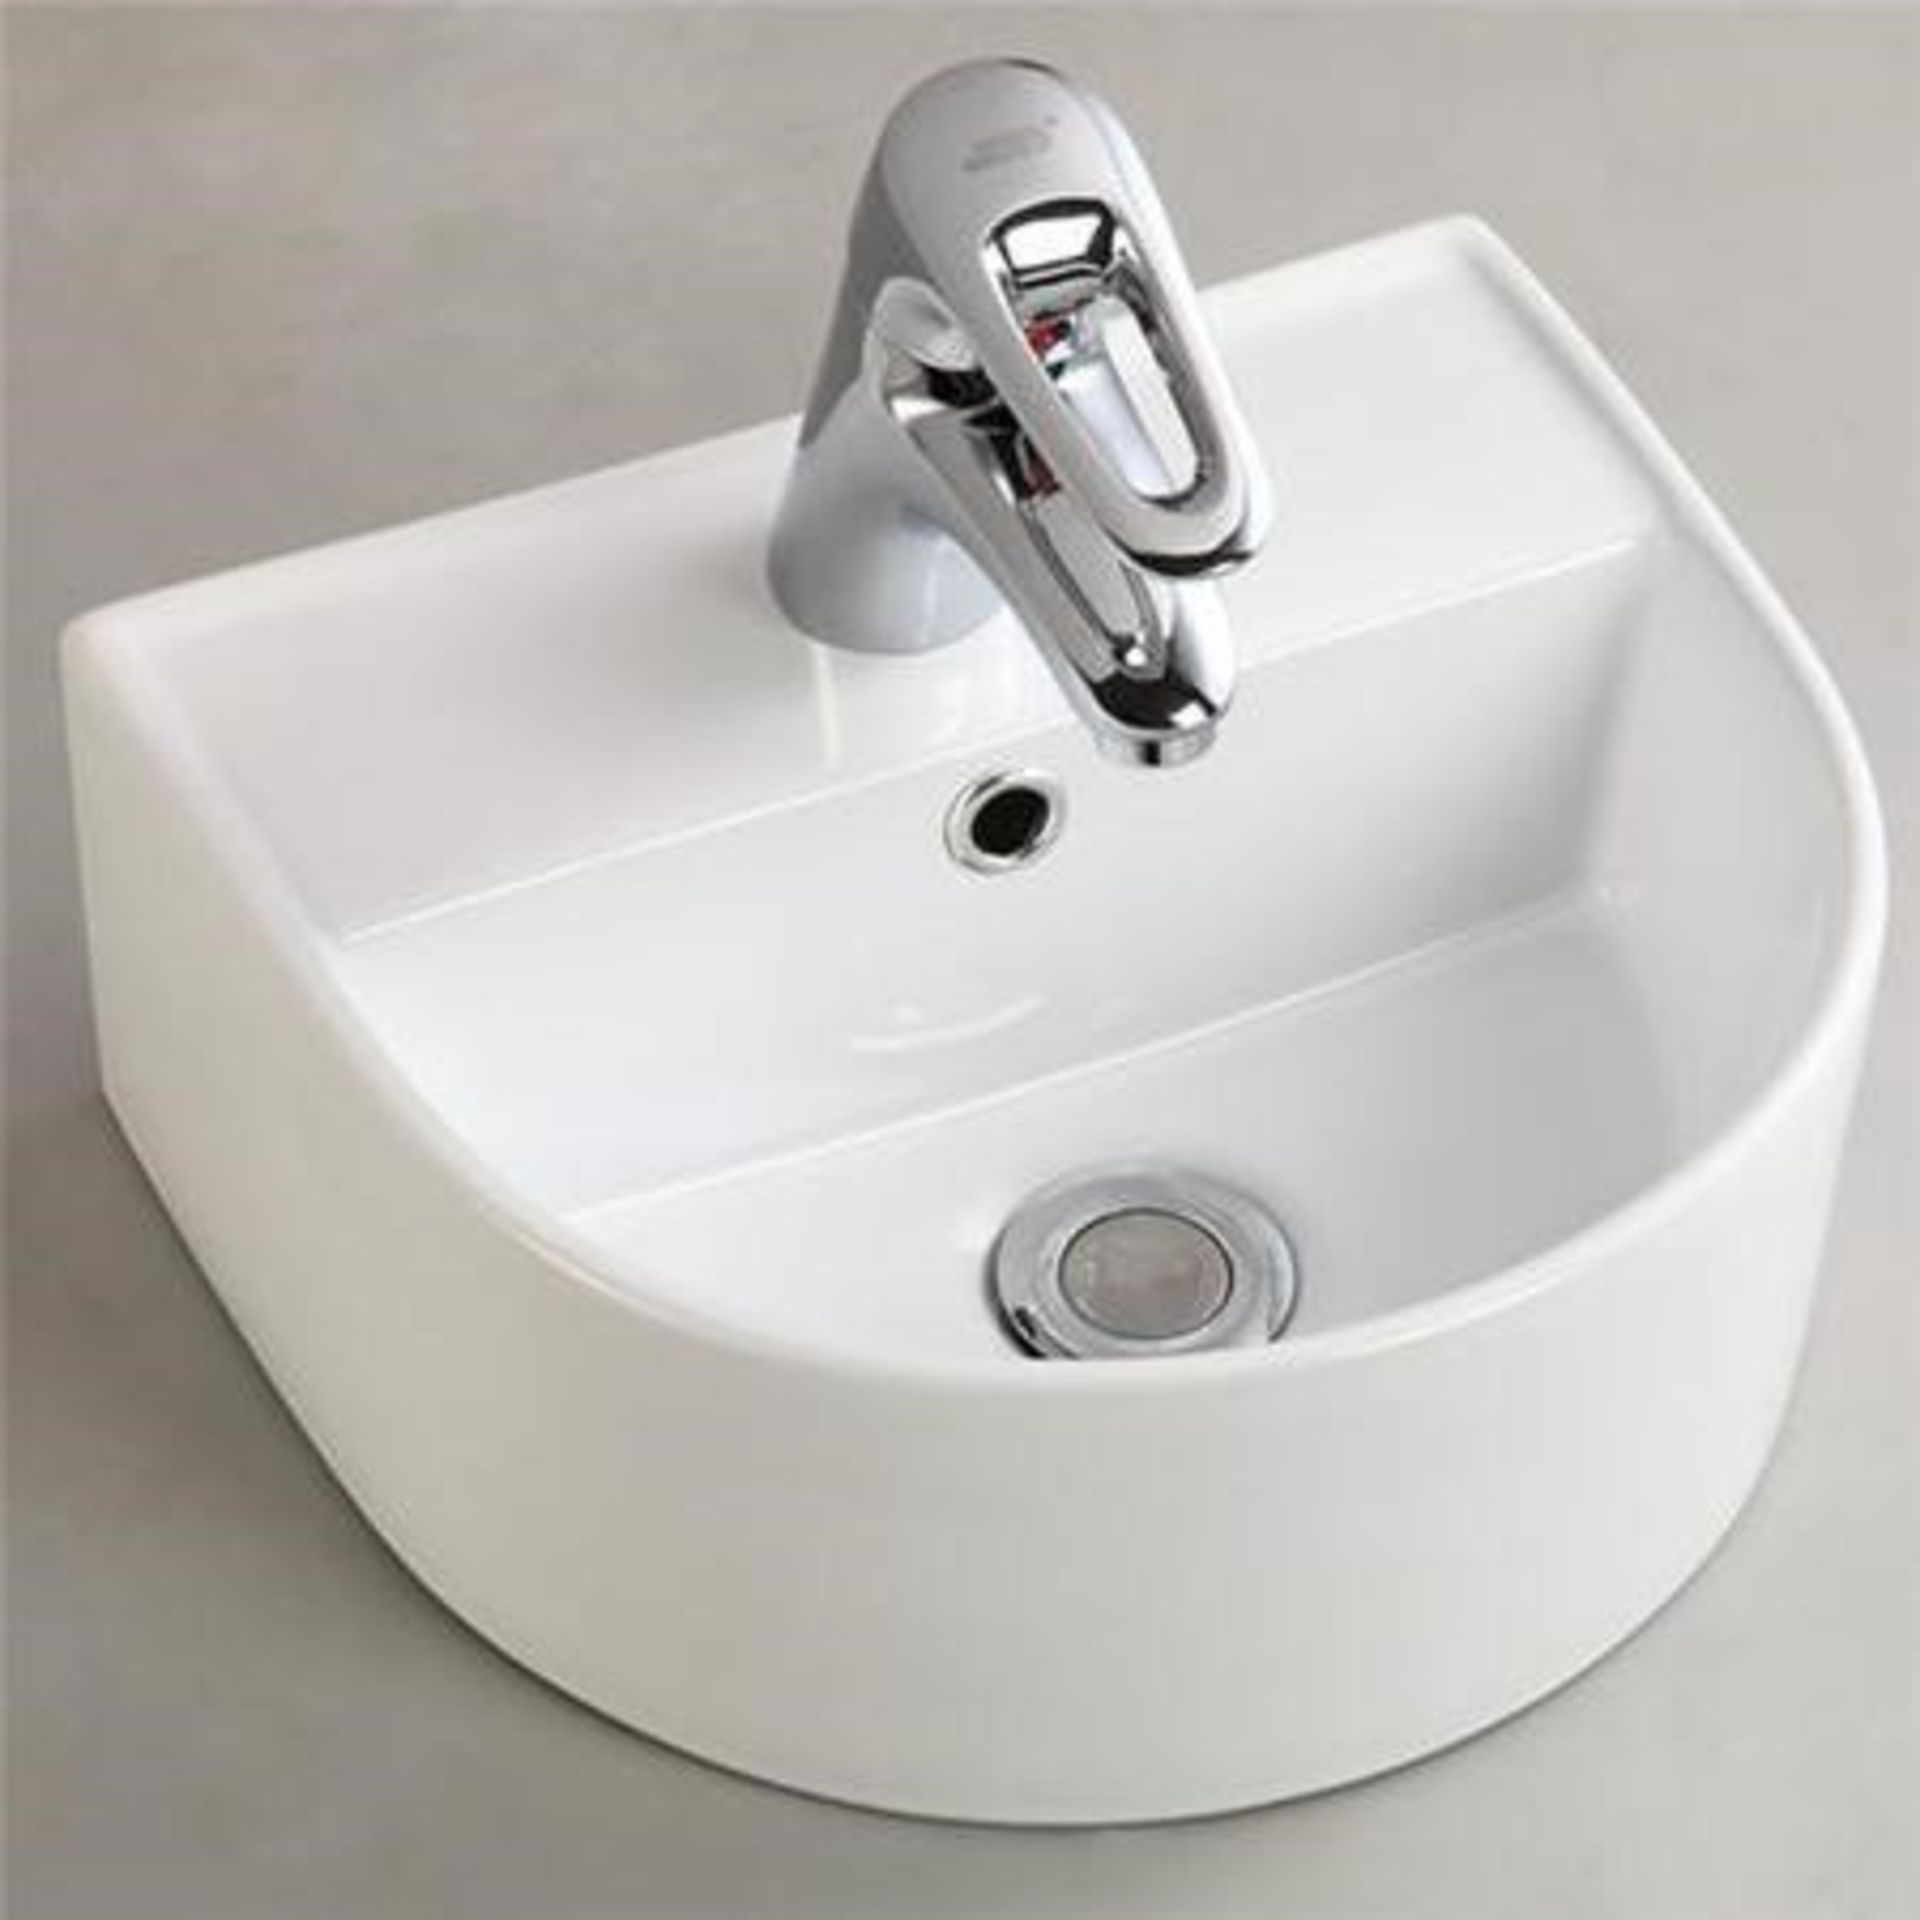 Arco Cloakroom Basin with Tap. - R12/13. RRP £155.99. The Arco basin can be used as a countertop